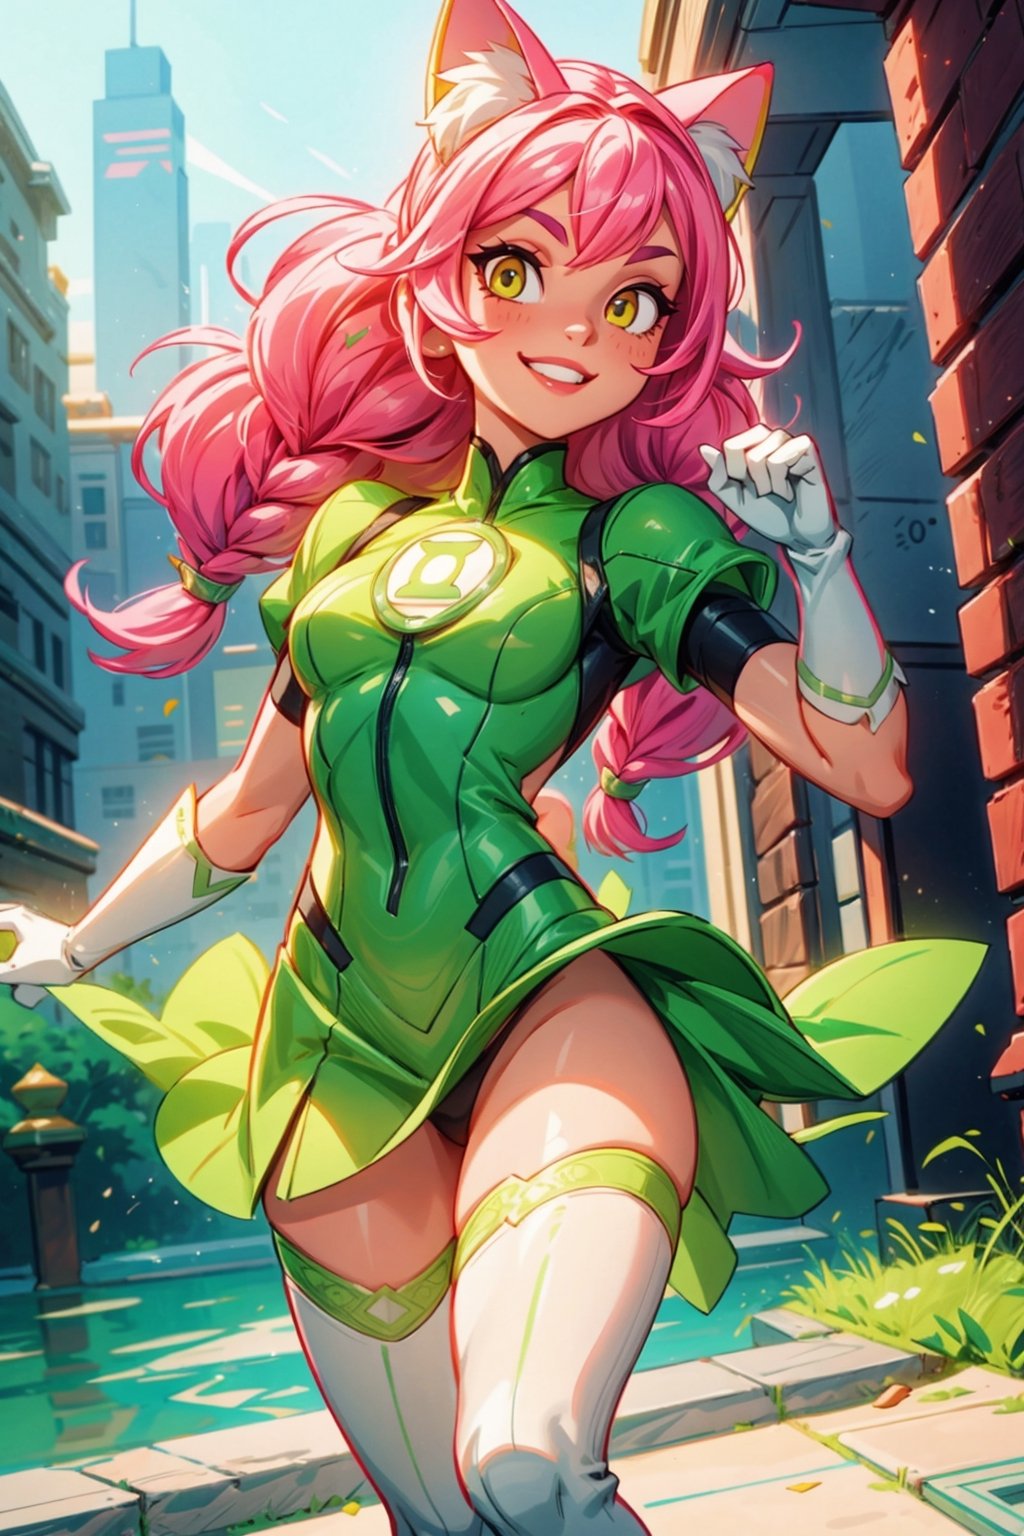 1girl, Portrait of the beautiful Lopadex, athletic, green lantern dress:1.2, pink hair:1.2, yellow eyes:1.2, pink cat ears:1.2, white leather boots, white leather gloves, smiling,braids,make up,voluminous lighting, Best Quality, Masterpiece, intricate details, tonemapping, sharp-focus, hyper detailed, Trending on ArtStation, 